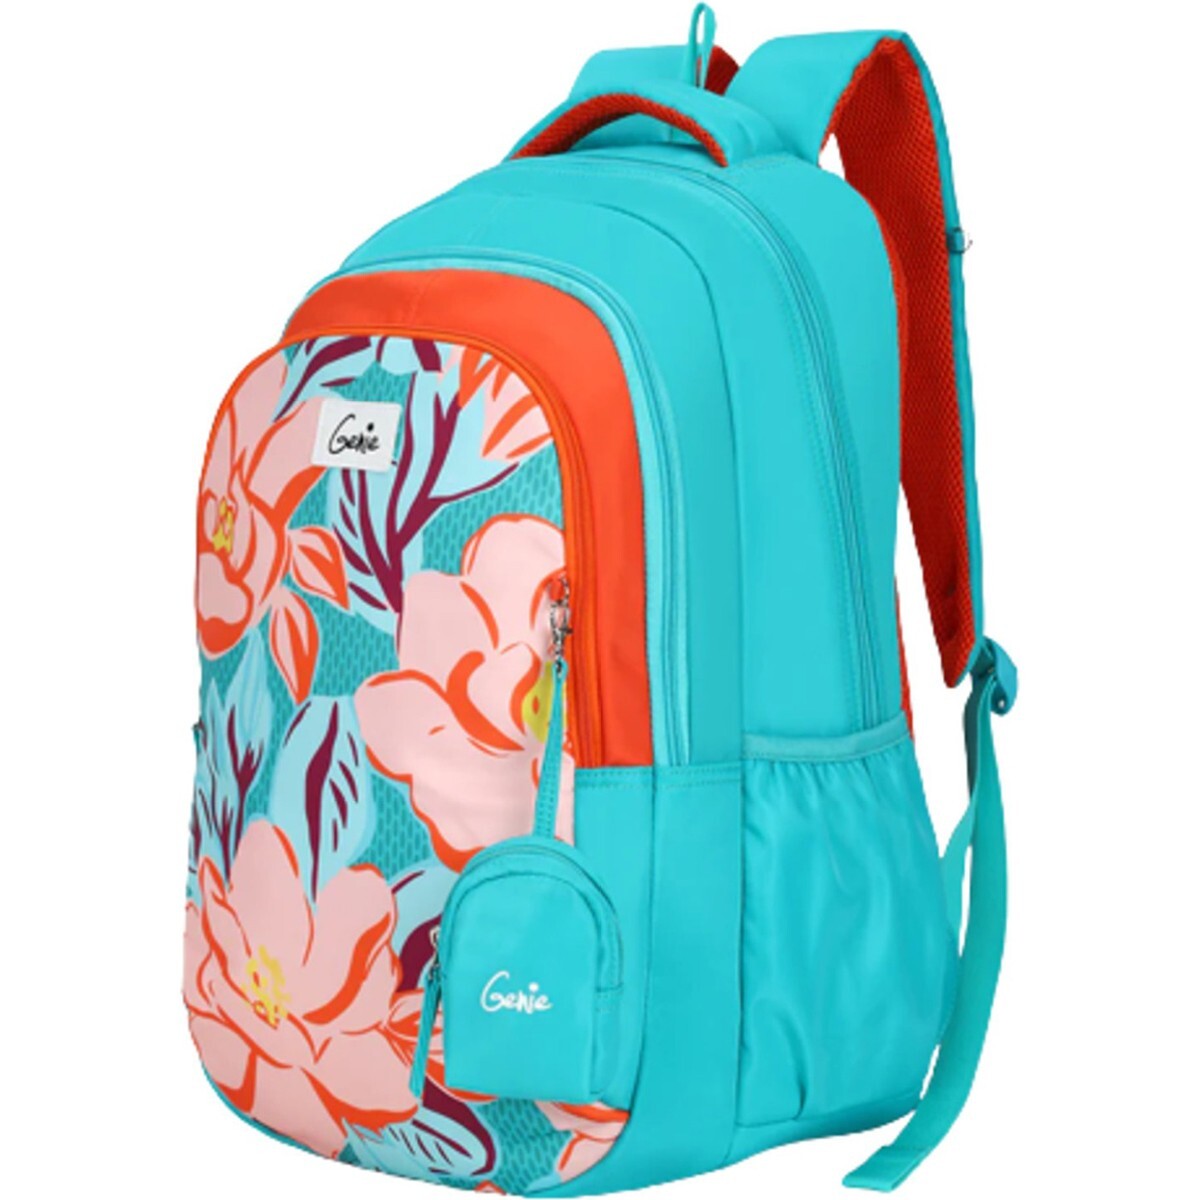 Genie Backpacks Willow 19inch Teal